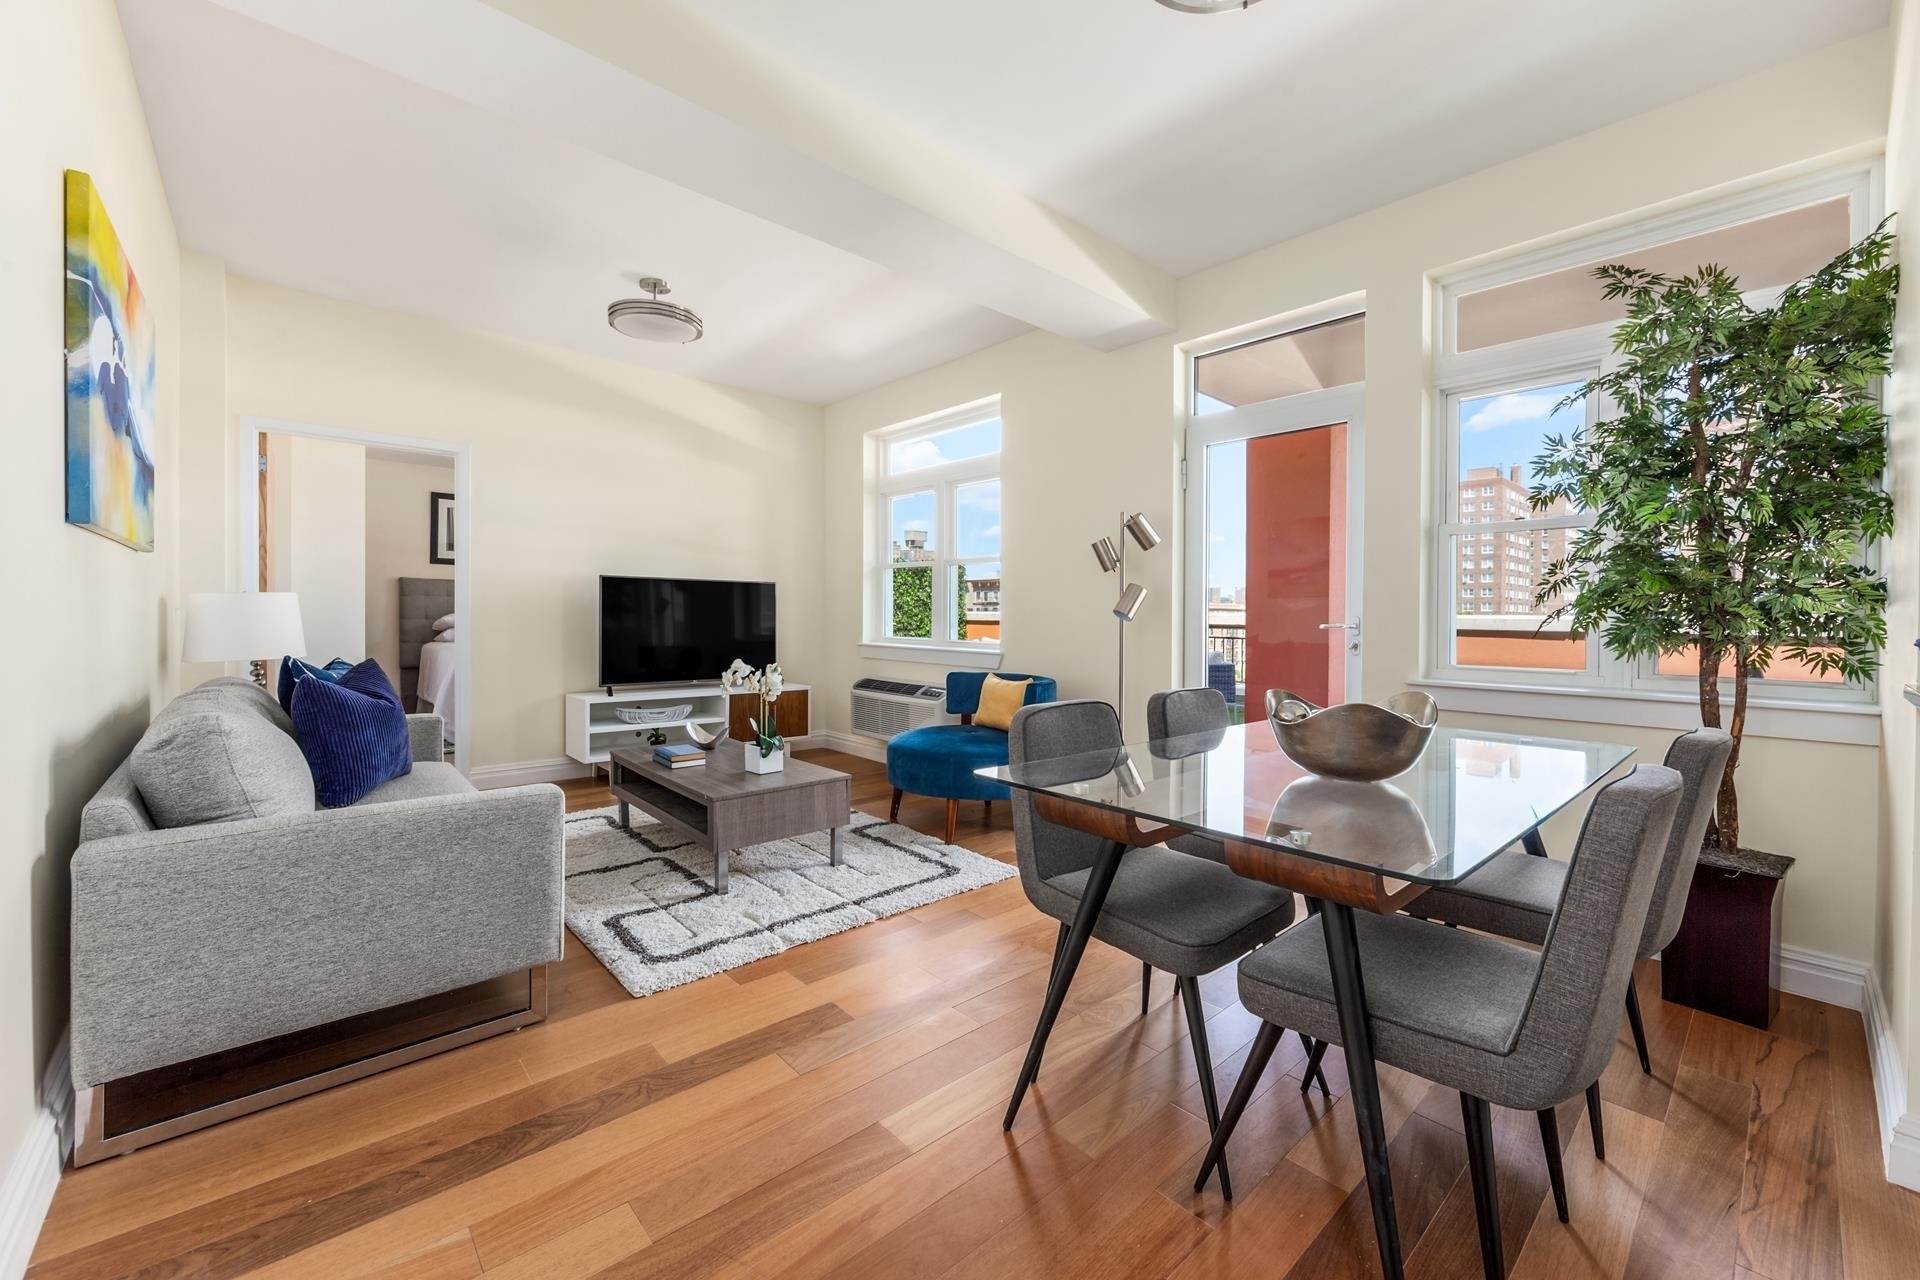 Property at 70 West 139th St, 8C New York